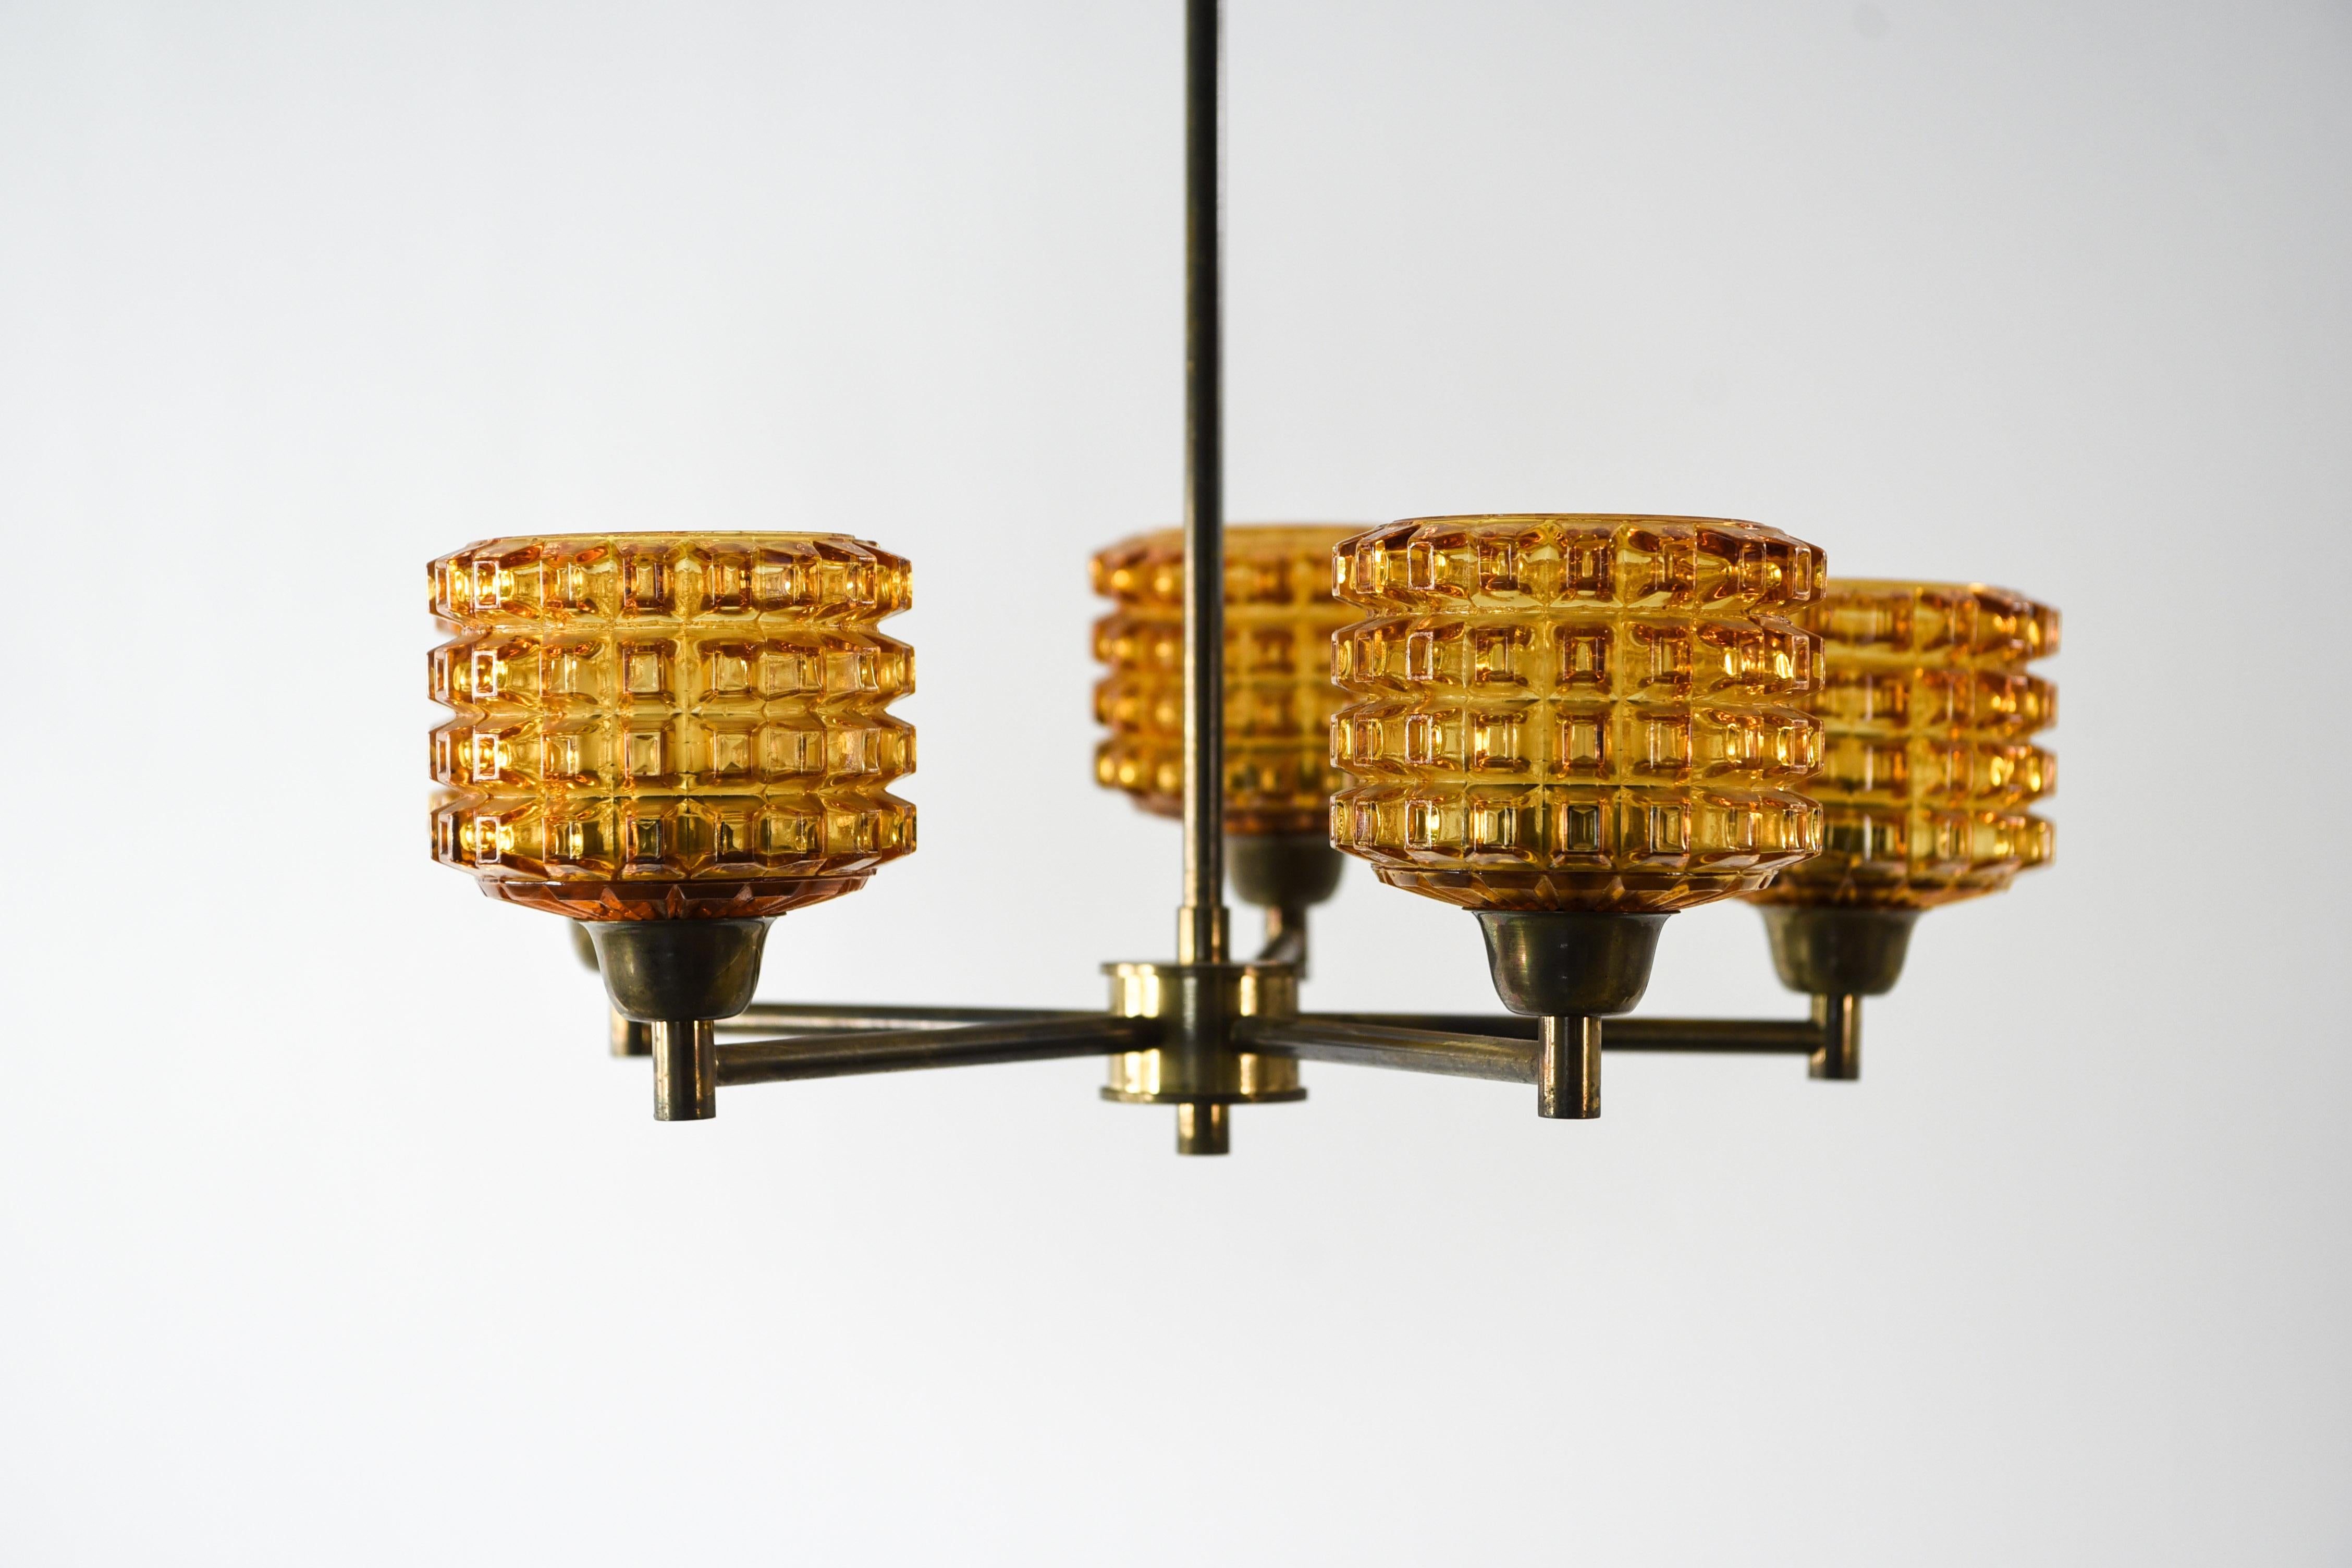 This five-arm Swedish midcentury chandelier was designed by Carl Fagerlund for Orrefors. This piece features a brass body with orange textures glass shades. This chandelier has a classic Fagerlund for Orrefors appearance with the fun detail of